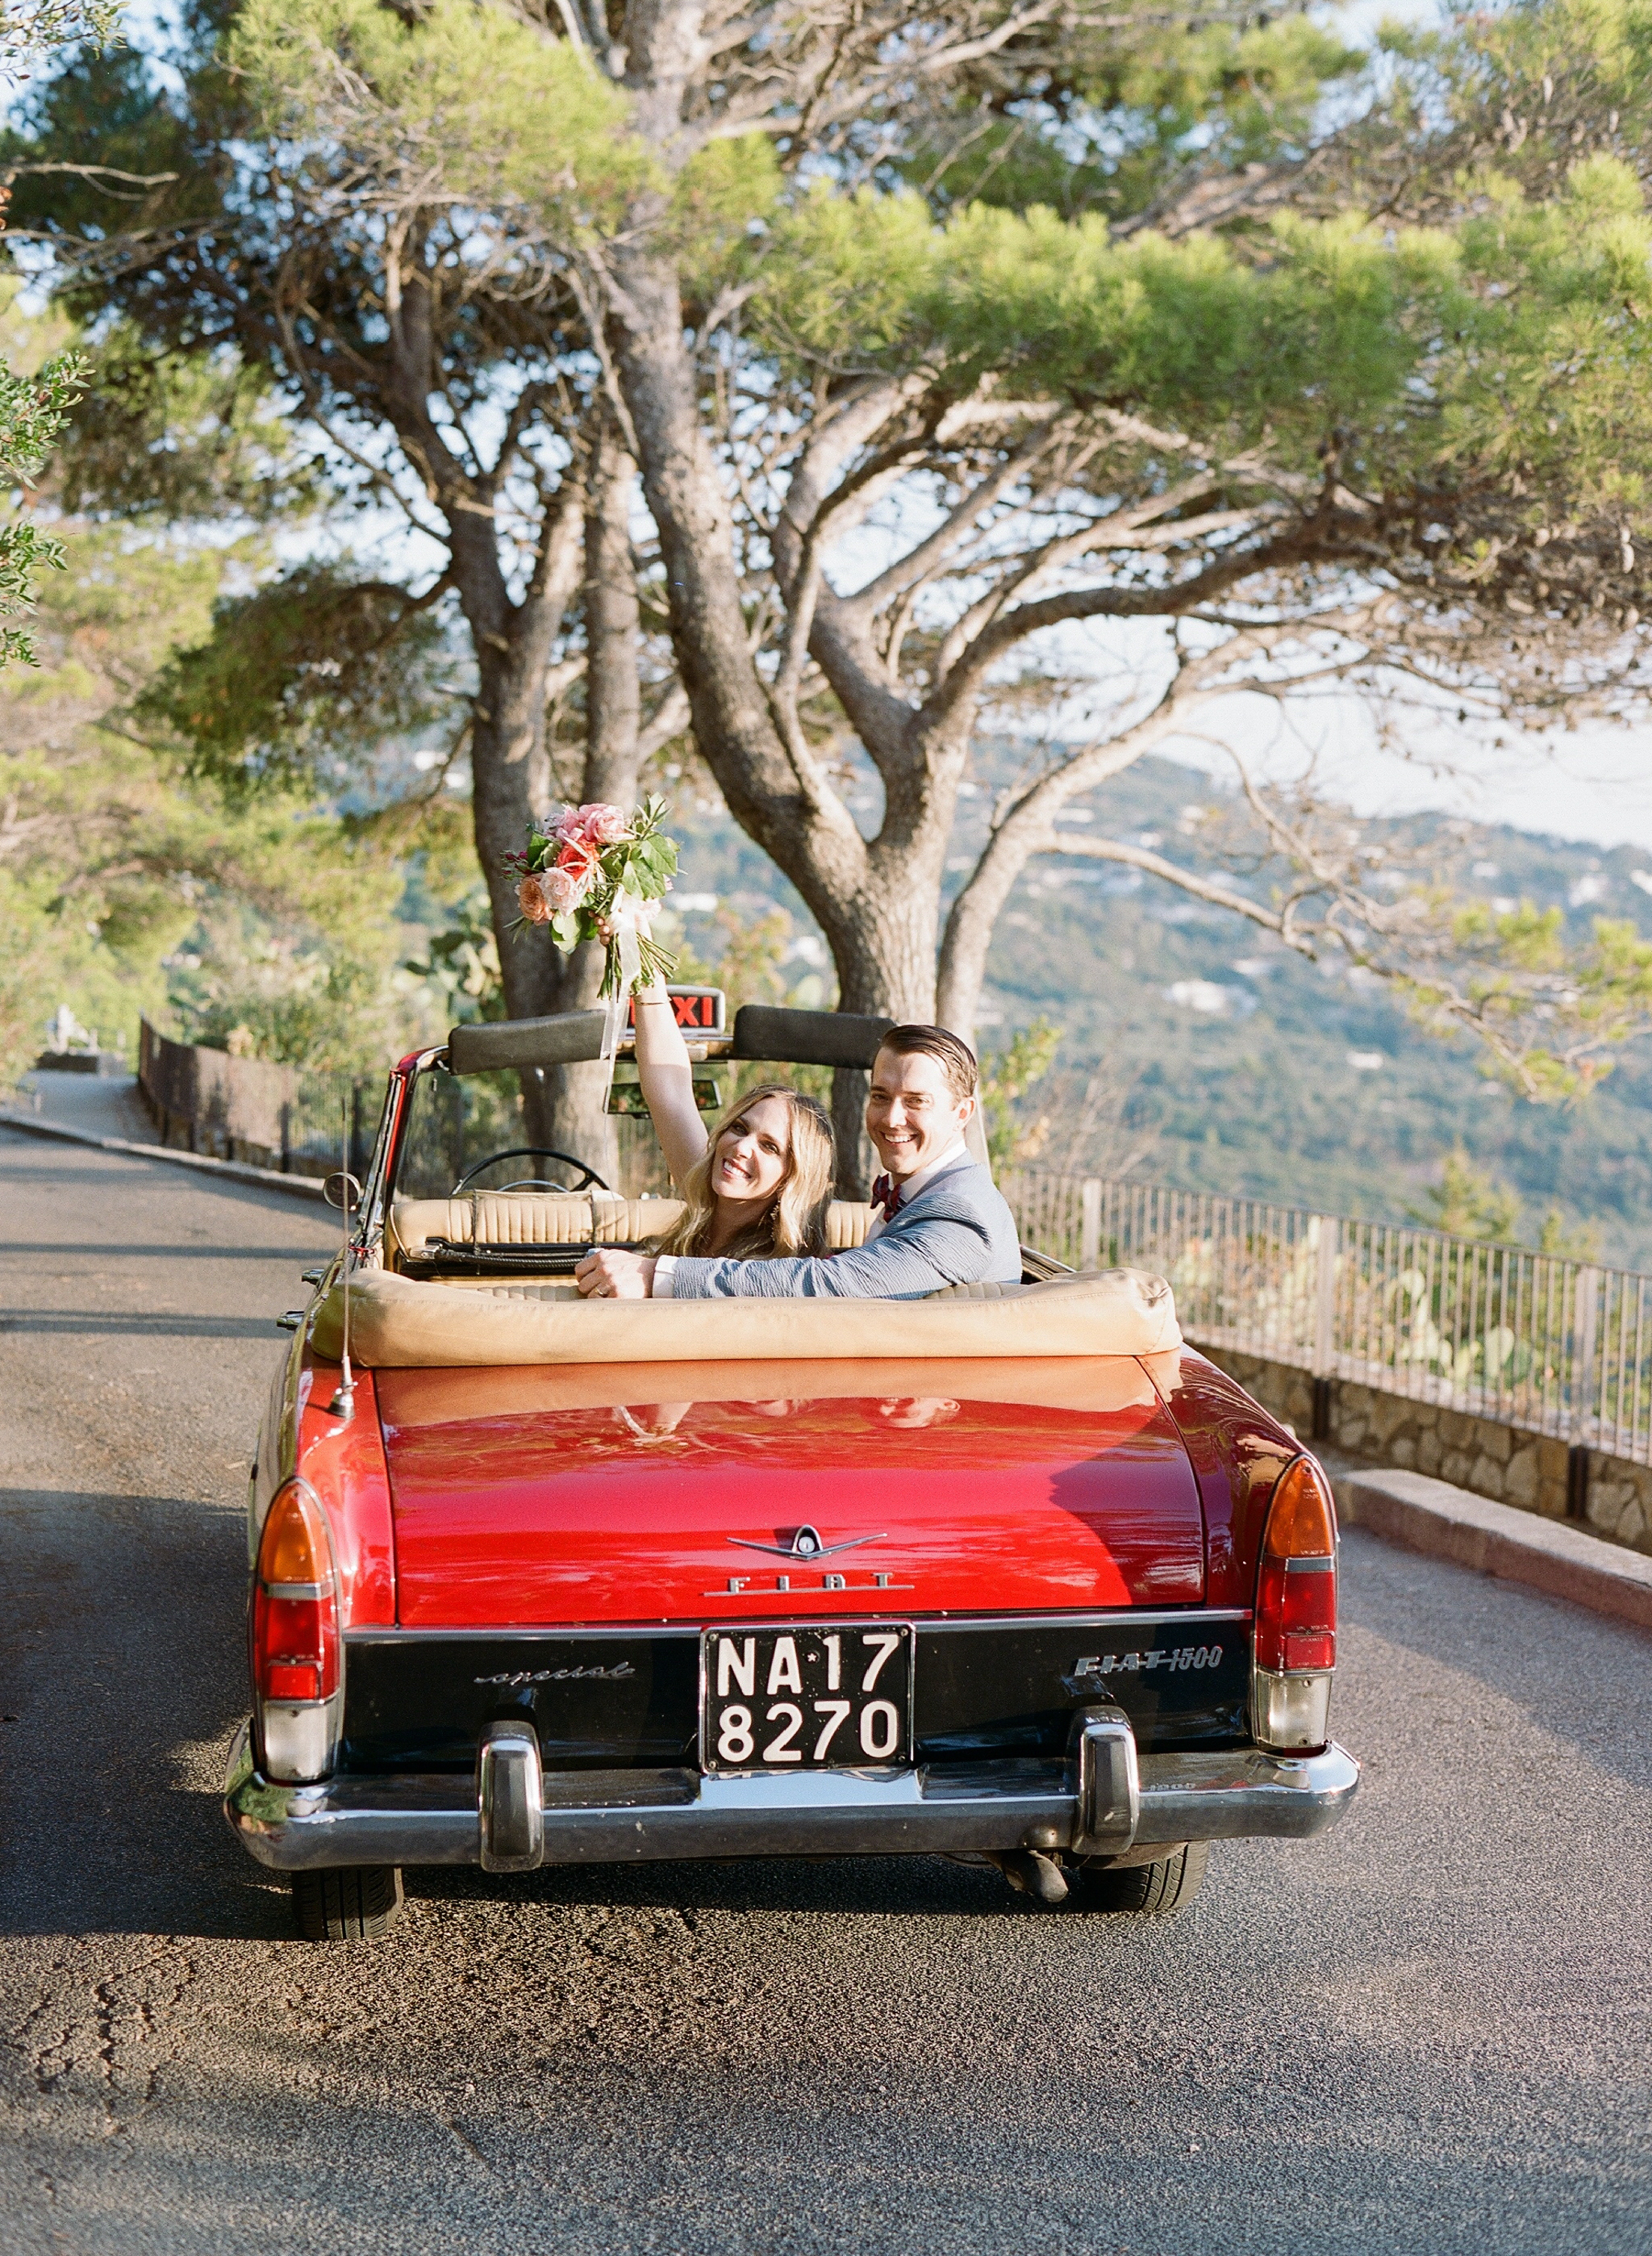 Elopements: How to find the ideal location - Capri